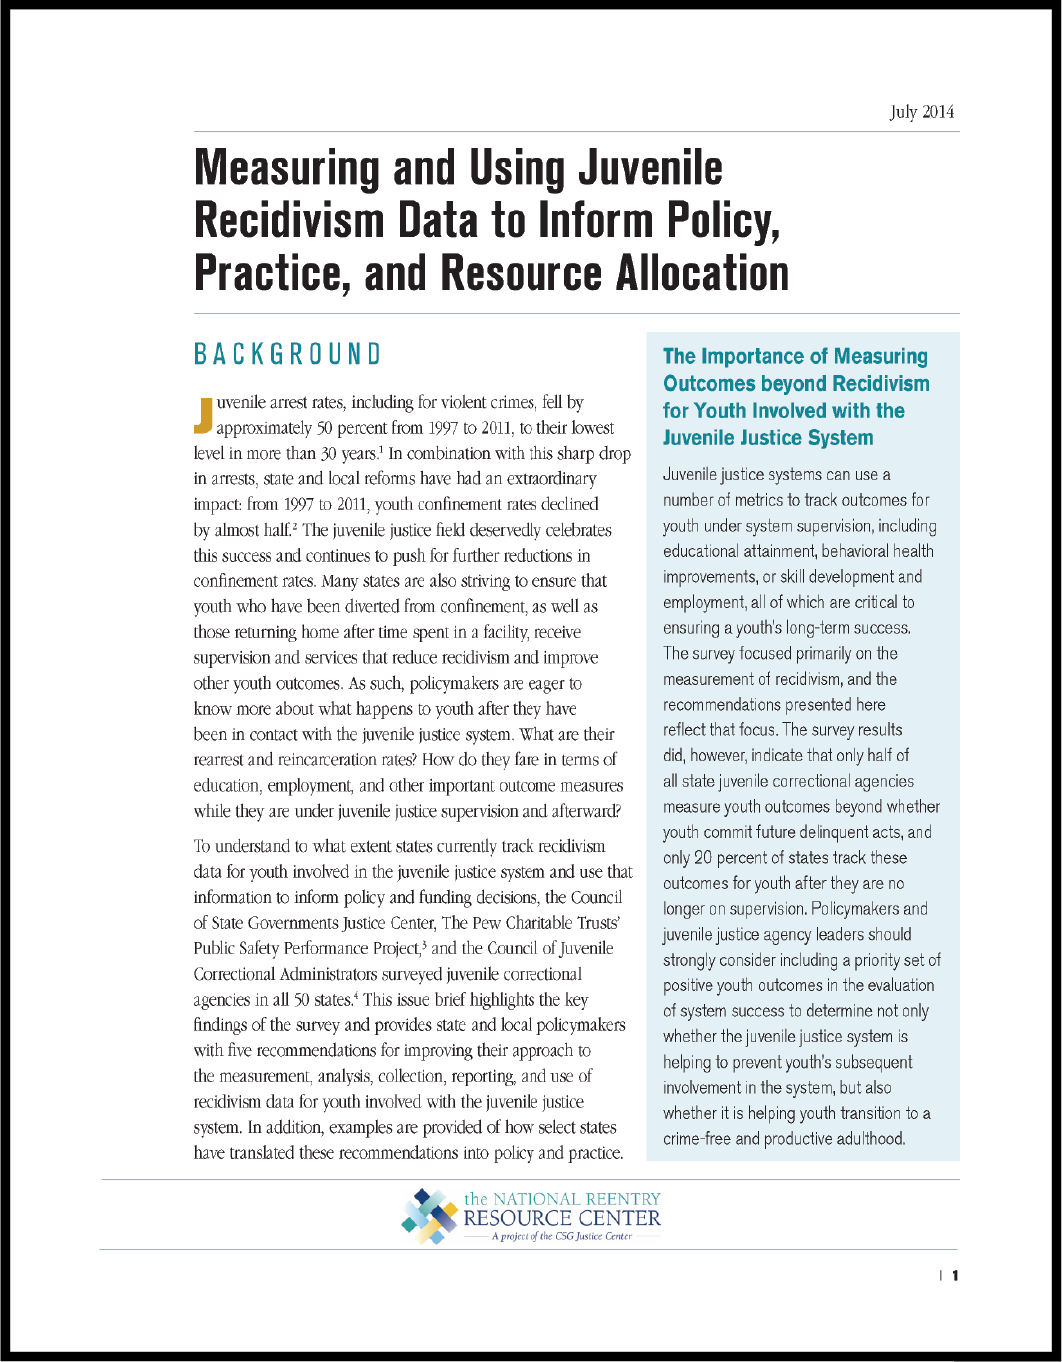 First page of document "Measuring and Using Juvenile Recidivism Data to Inform Policy, Practice, and Resource Allocation"